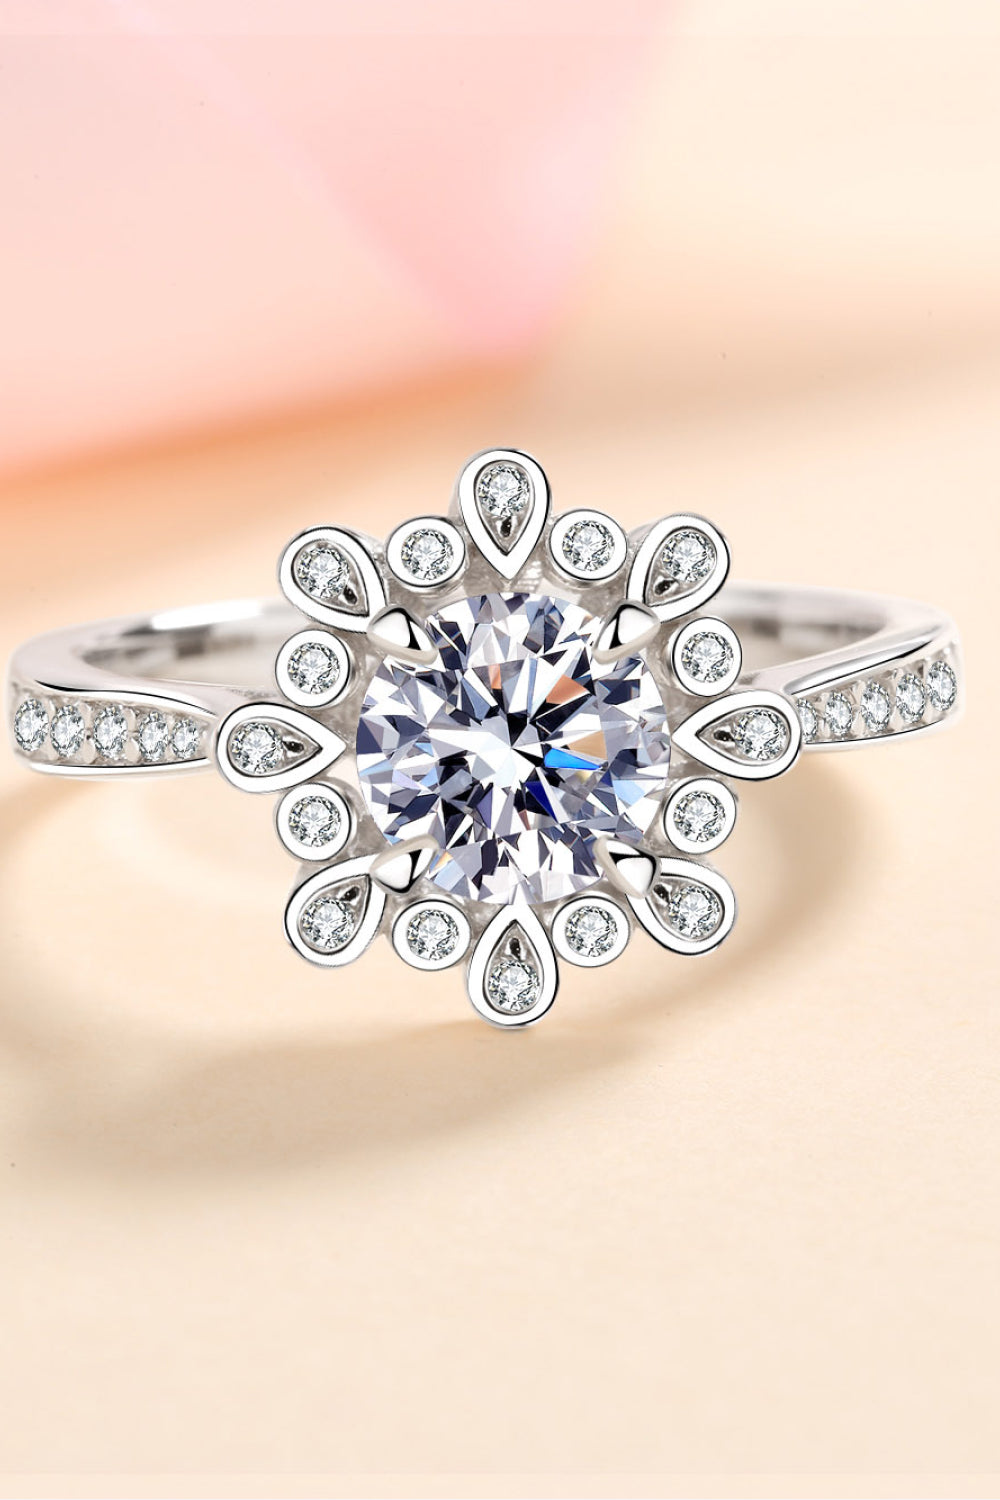 Can't Stop Your Shine 925 Sterling Silver Moissanite Ring - DromedarShop.com Online Boutique